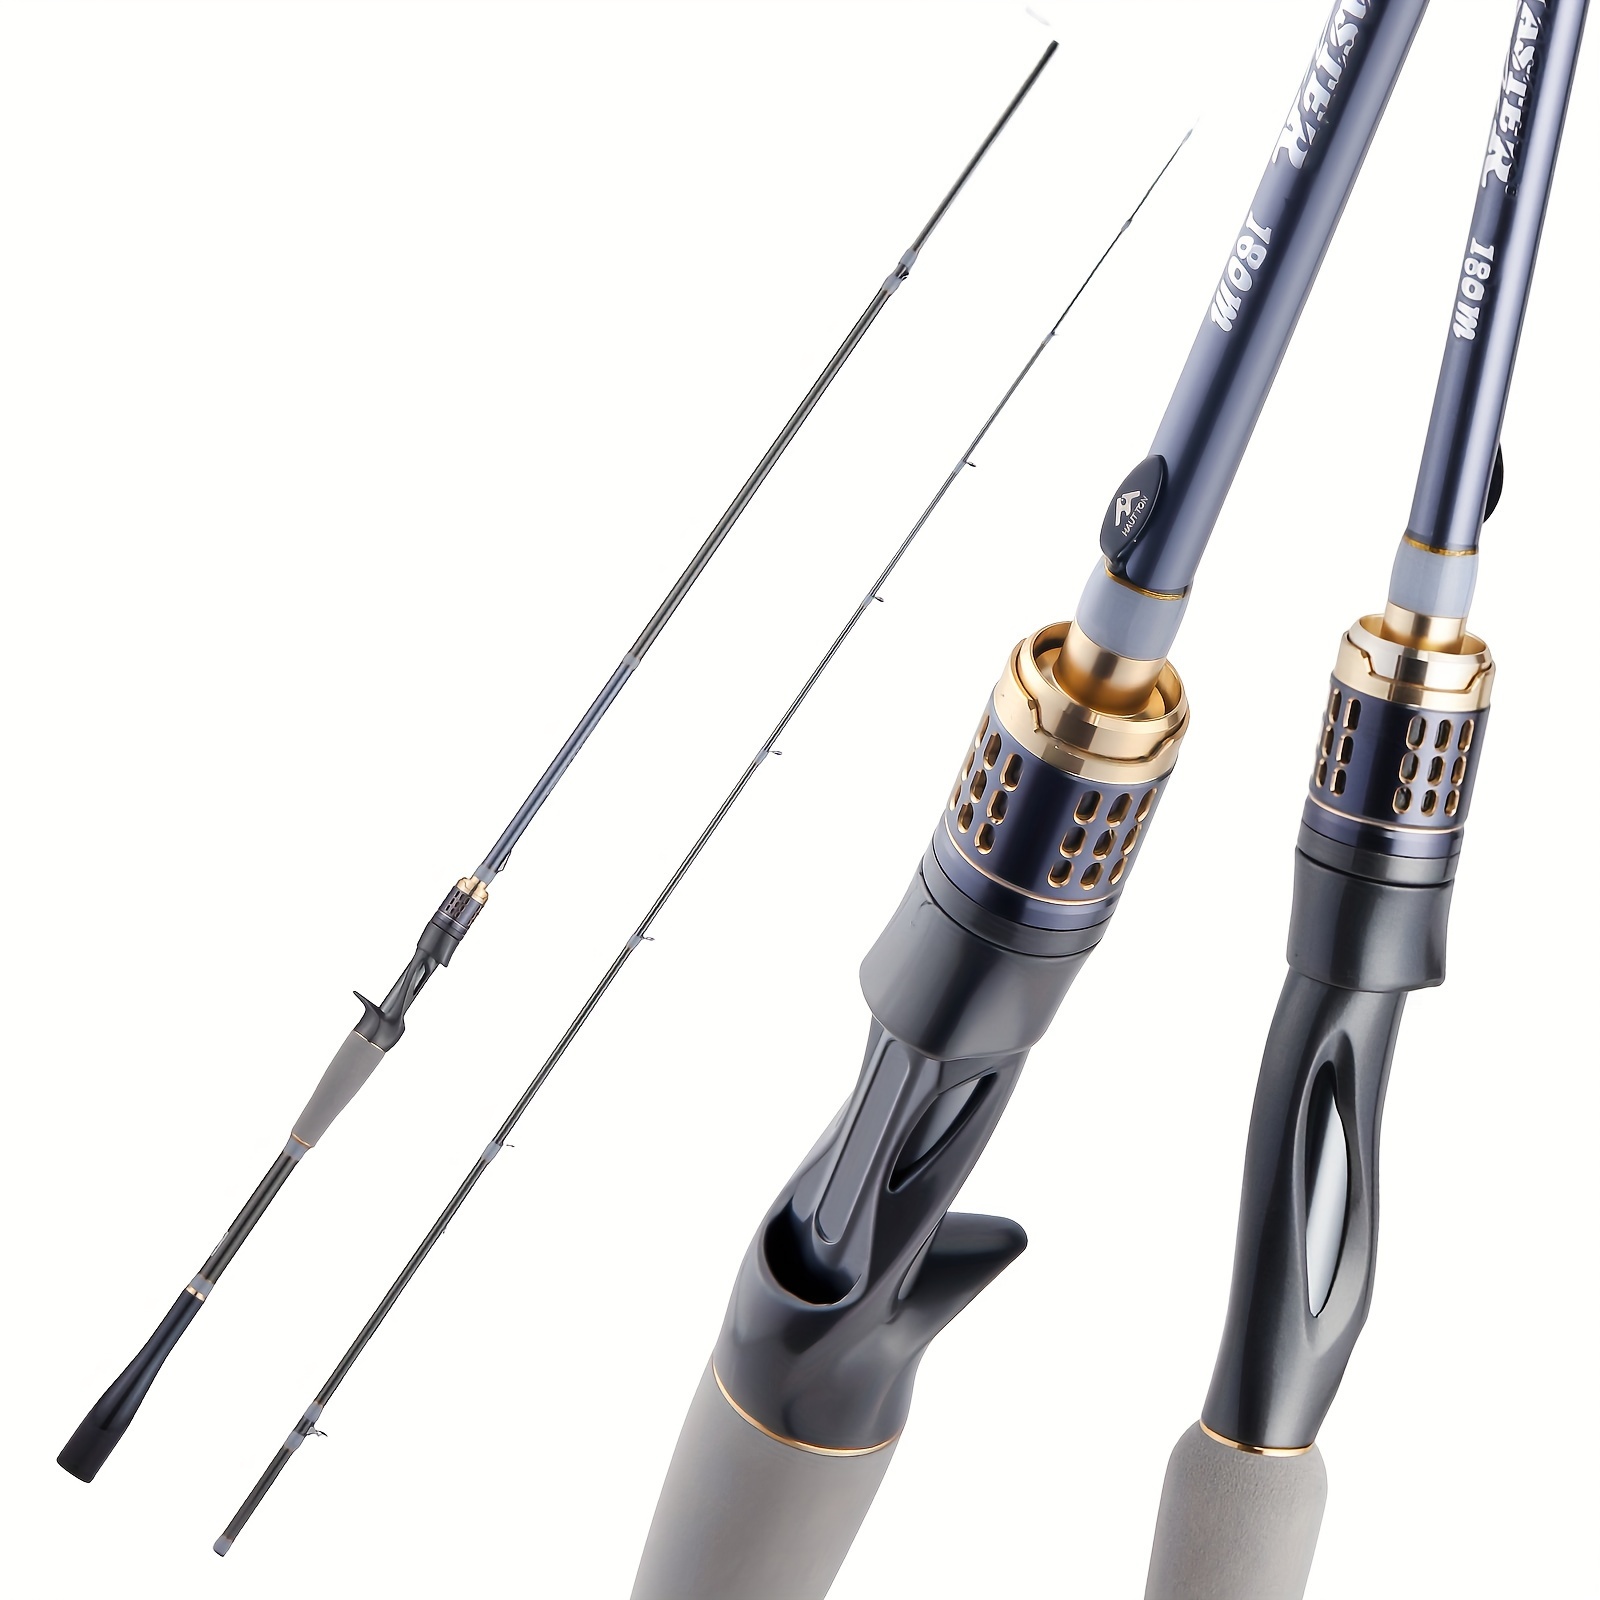 Shimano Zodias Casting and Spinning Rod Product Overview 